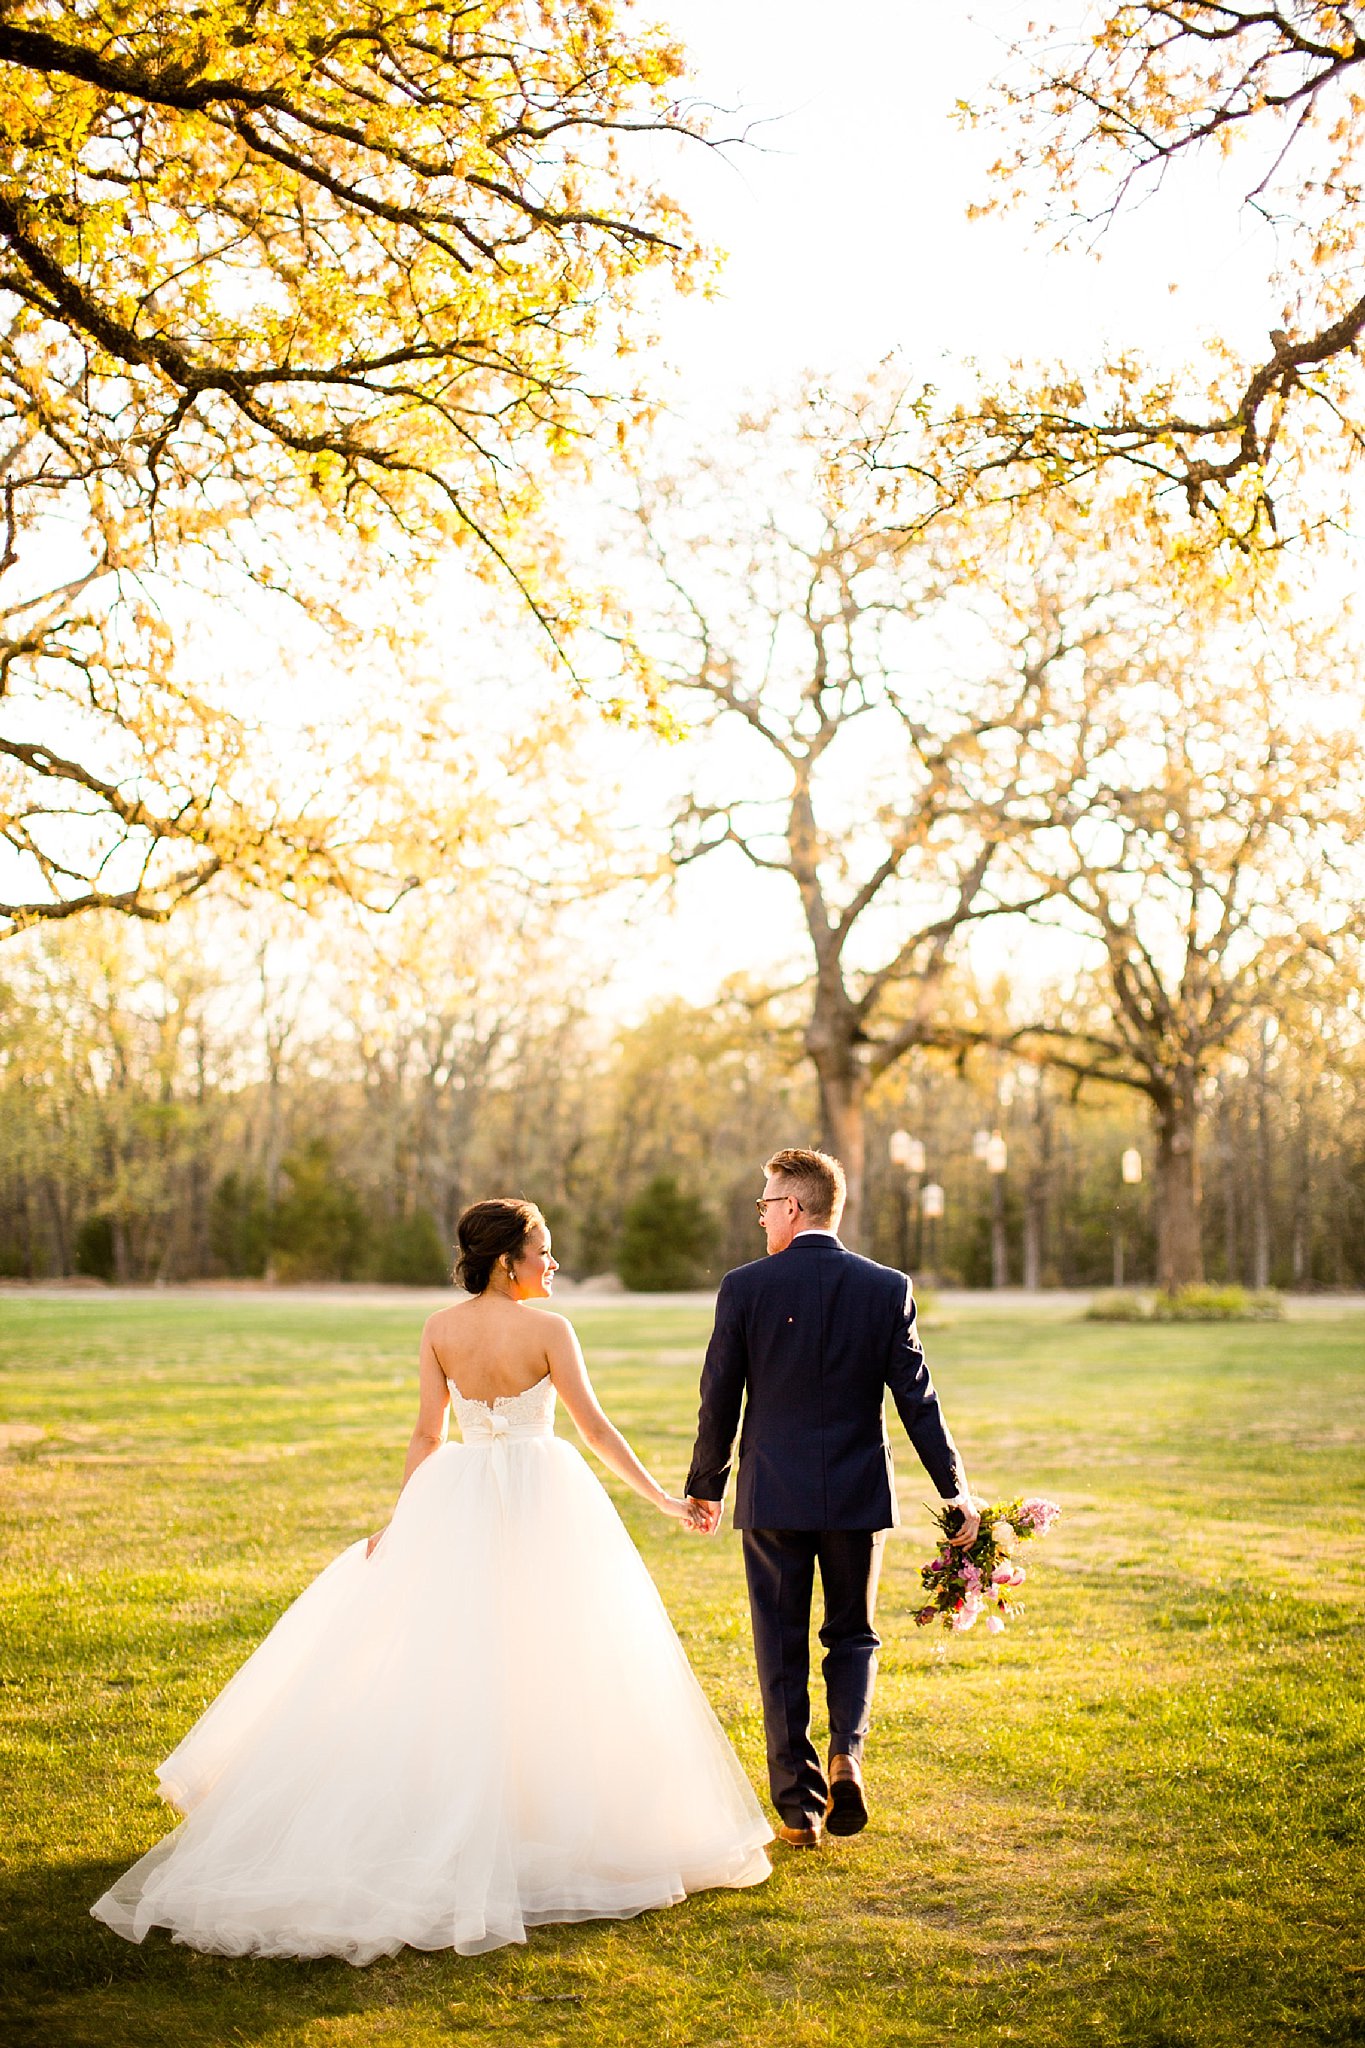 Bride and groom walking into the sunset at White Sparrow Barn